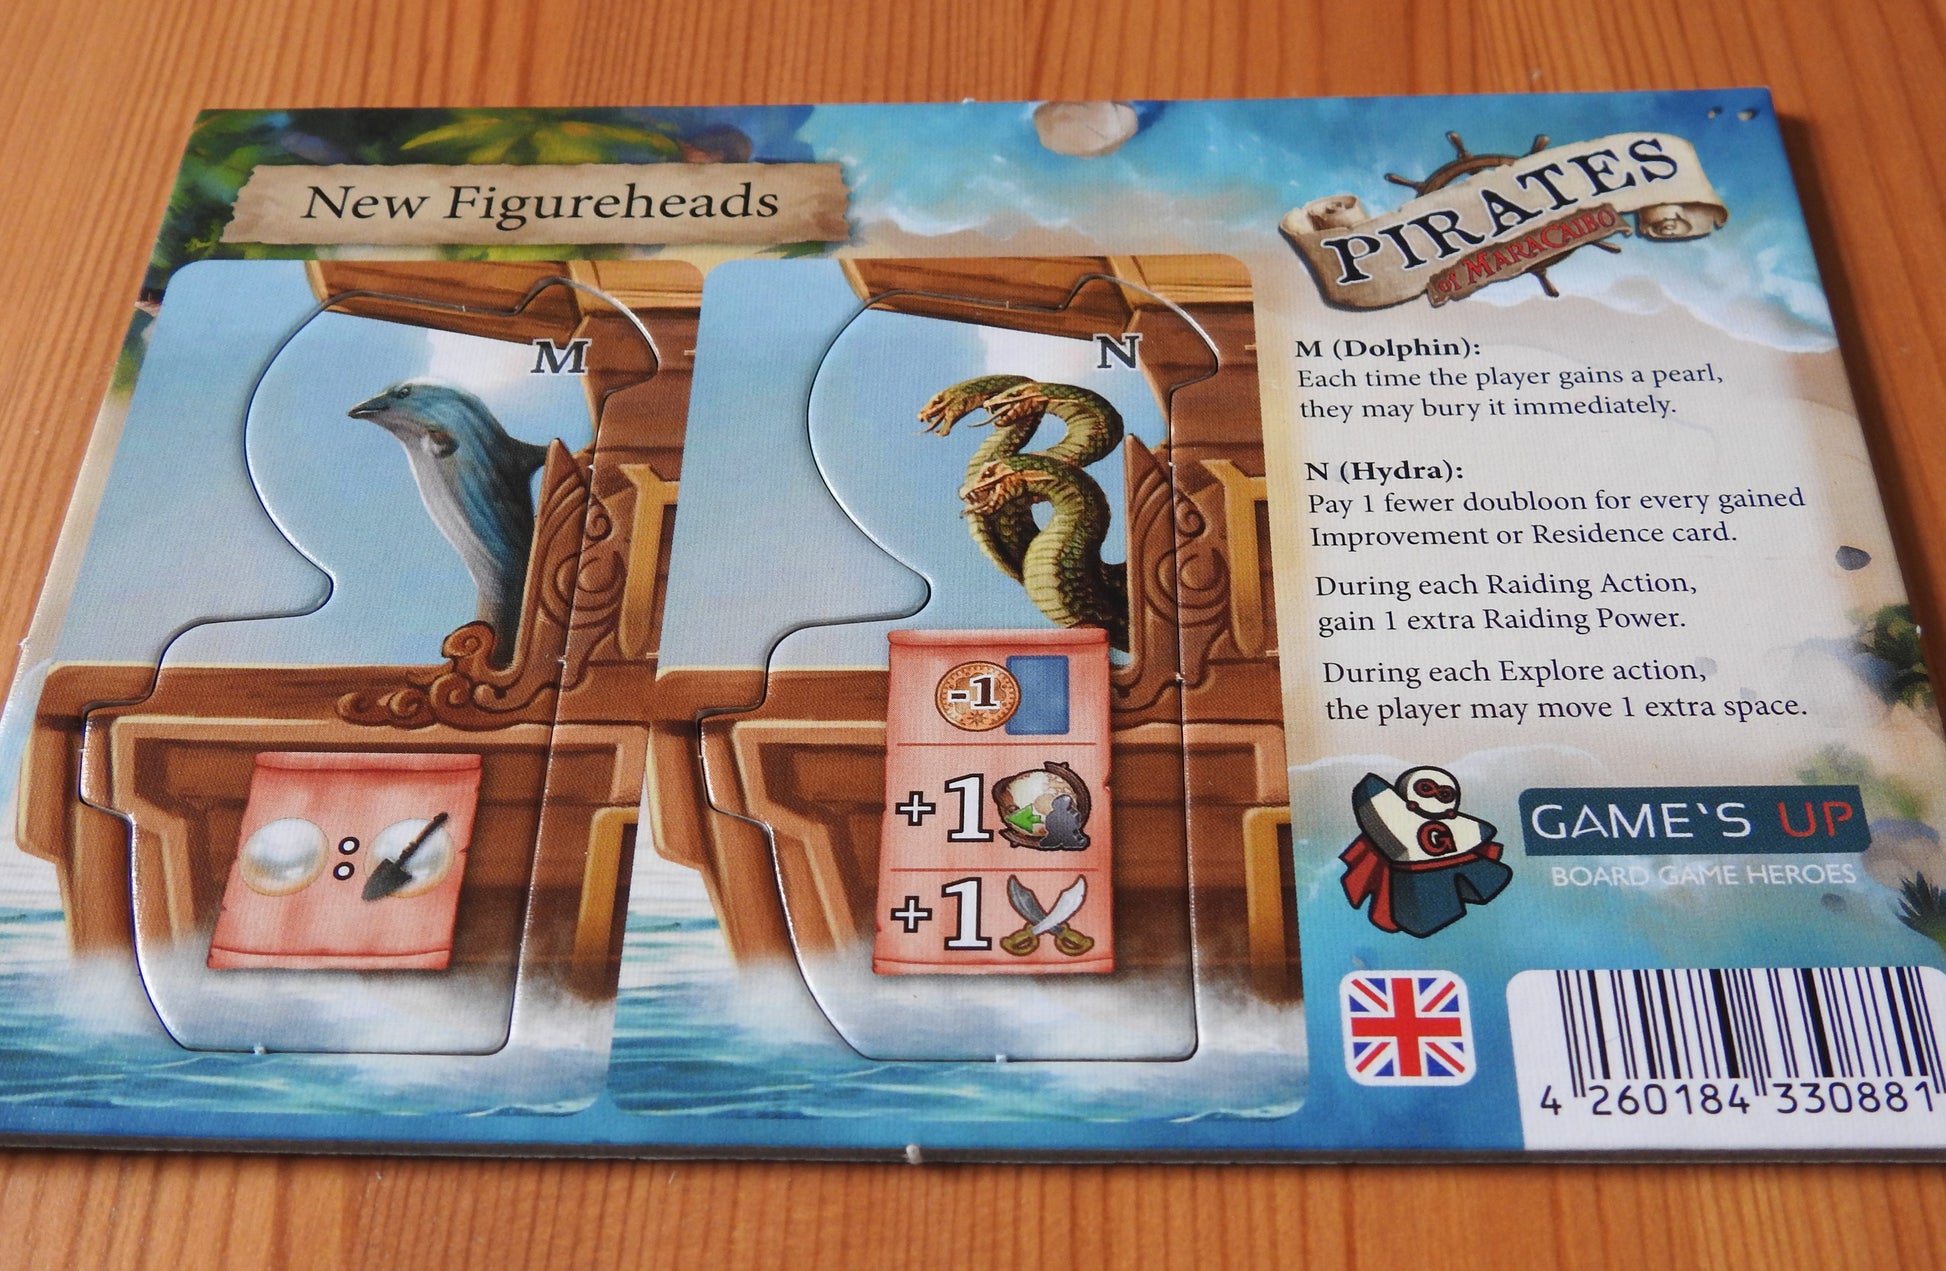 Another view from a lower angle showing the new figureheads and the English rules for this mini expansion to Pirates of Maracaibo.